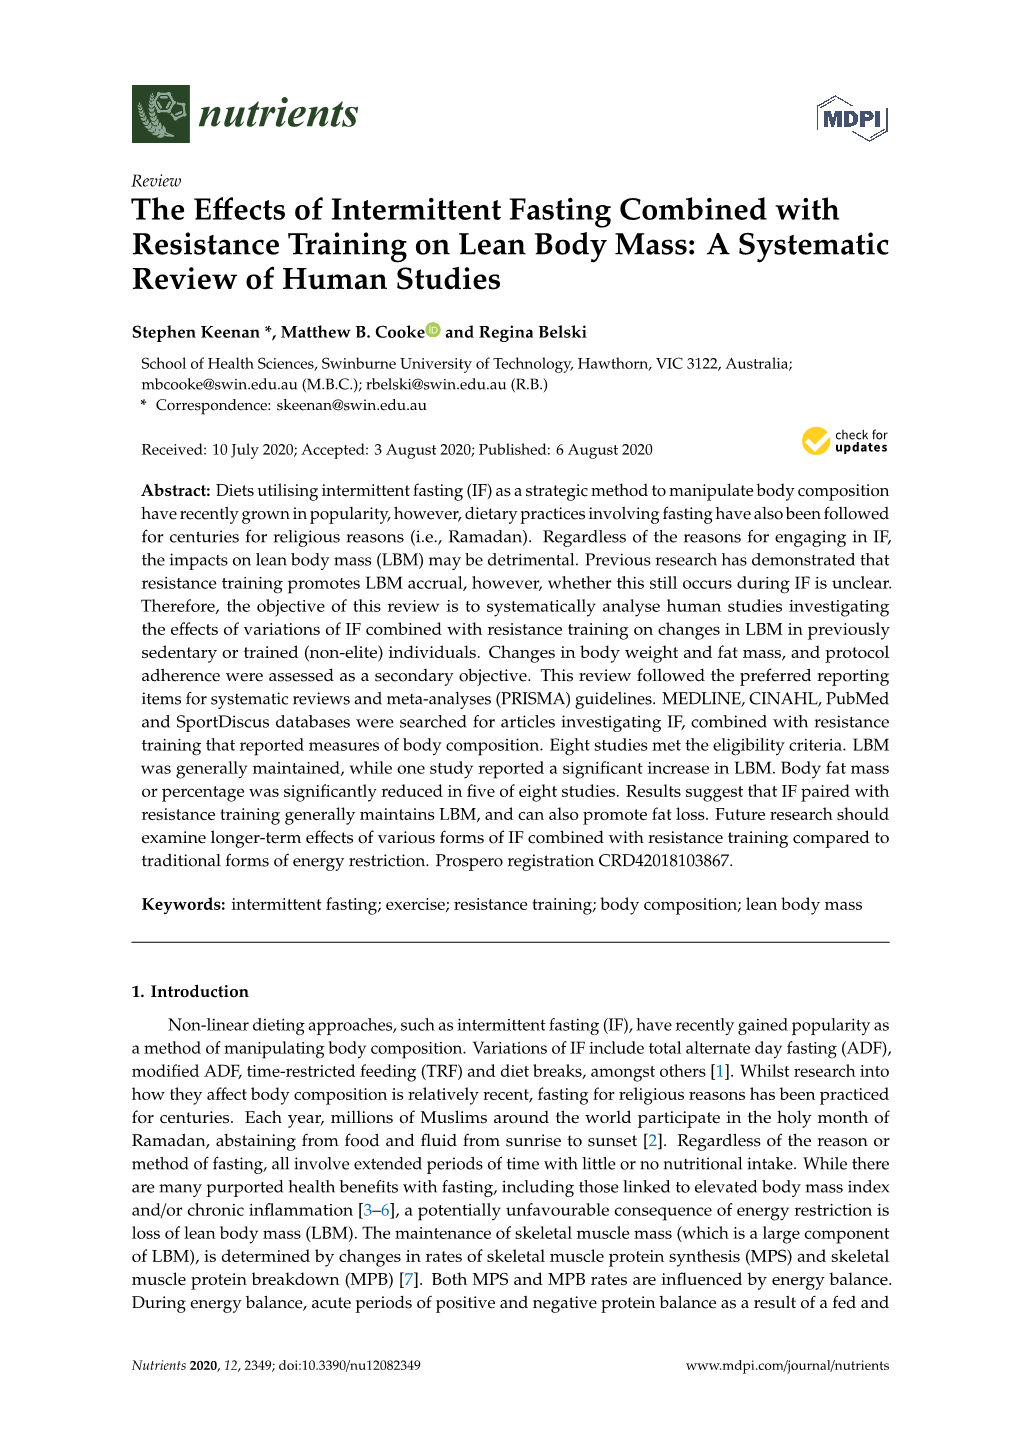 The Effects of Intermittent Fasting Combined with Resistance Training on Lean Body Mass: a Systematic Review of Human Studies